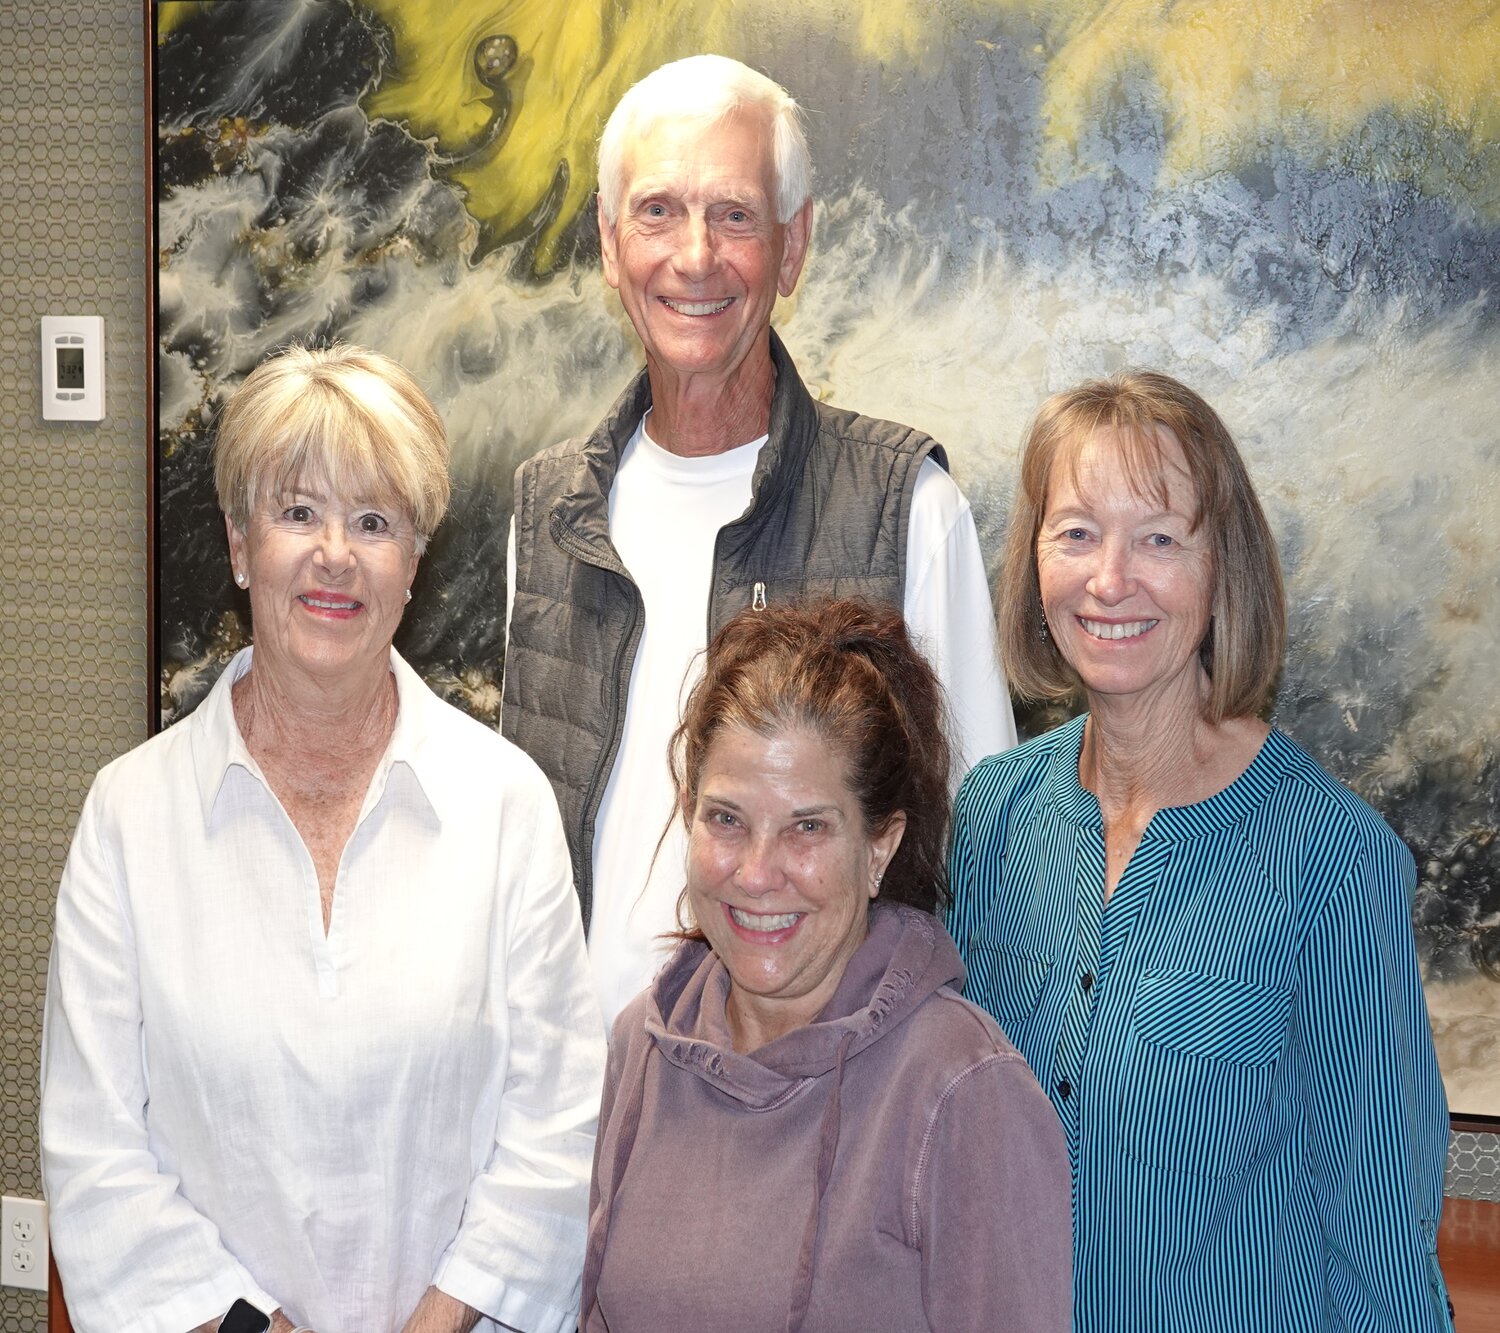 The new Valley of the Sun Ski Club officers are, from left, Judy Ainsworth of Surprise as president, Don Larsen from Sun City as treasurer, Koni Hohnbaum from Pebble Creek as communications and Sandy Tiedeman from Sun City West as secretary.